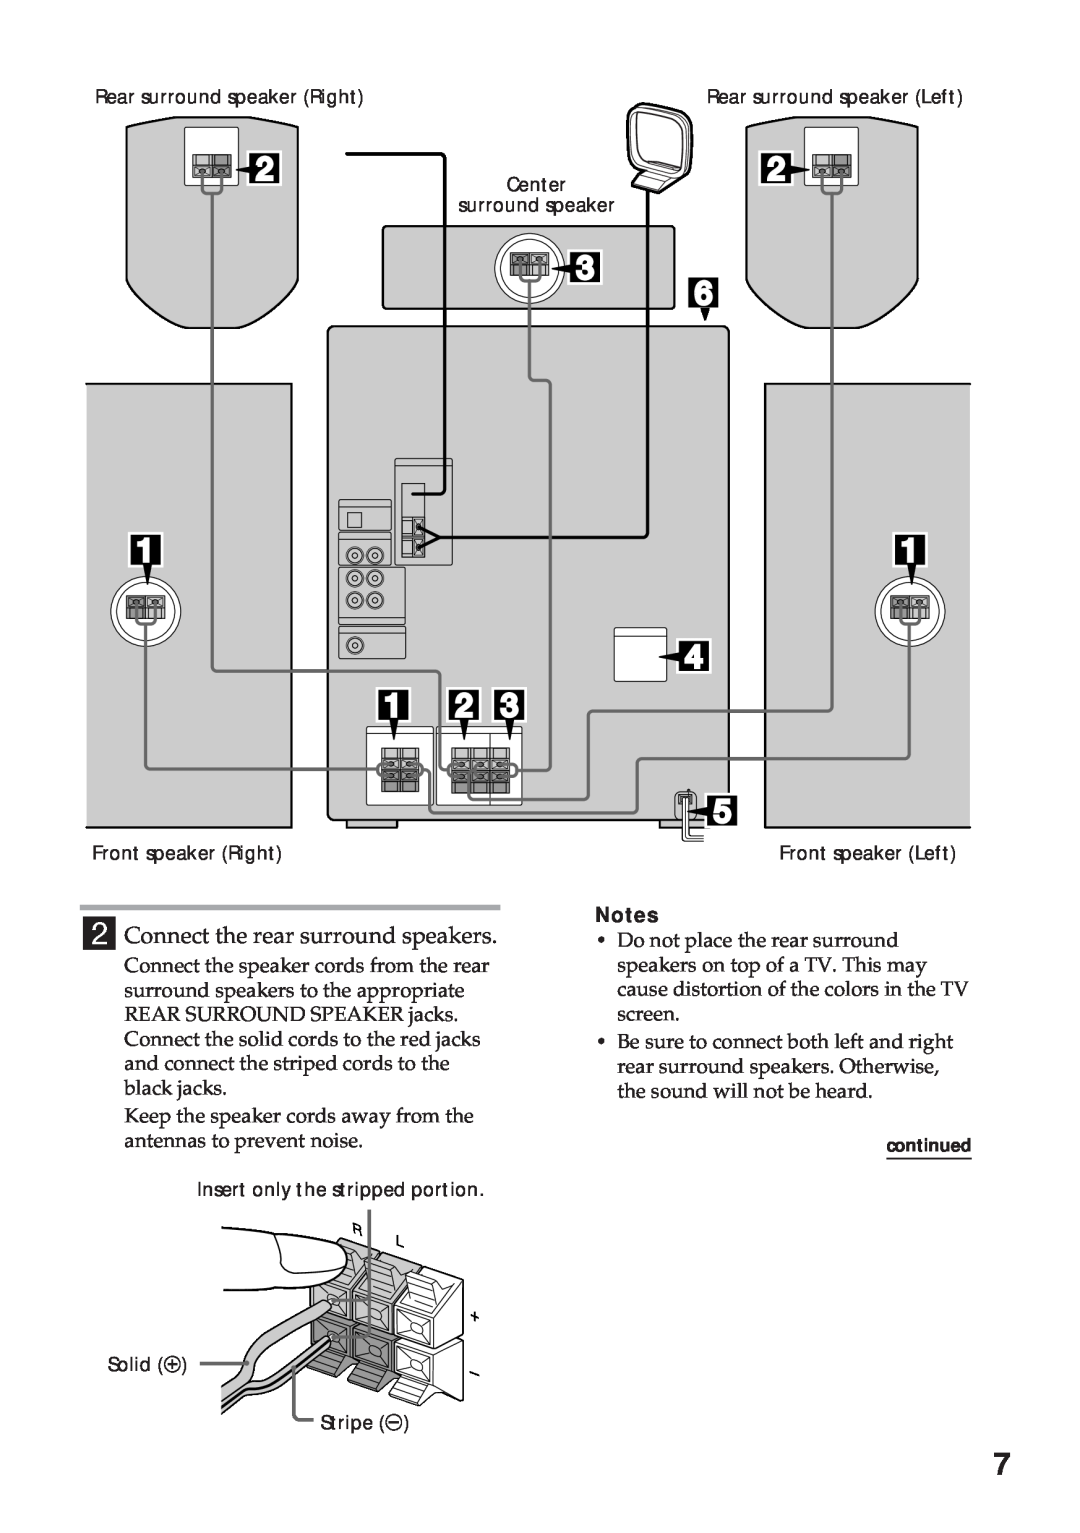 Sony MHC-GRX10AV operating instructions Connect the rear surround speakers 